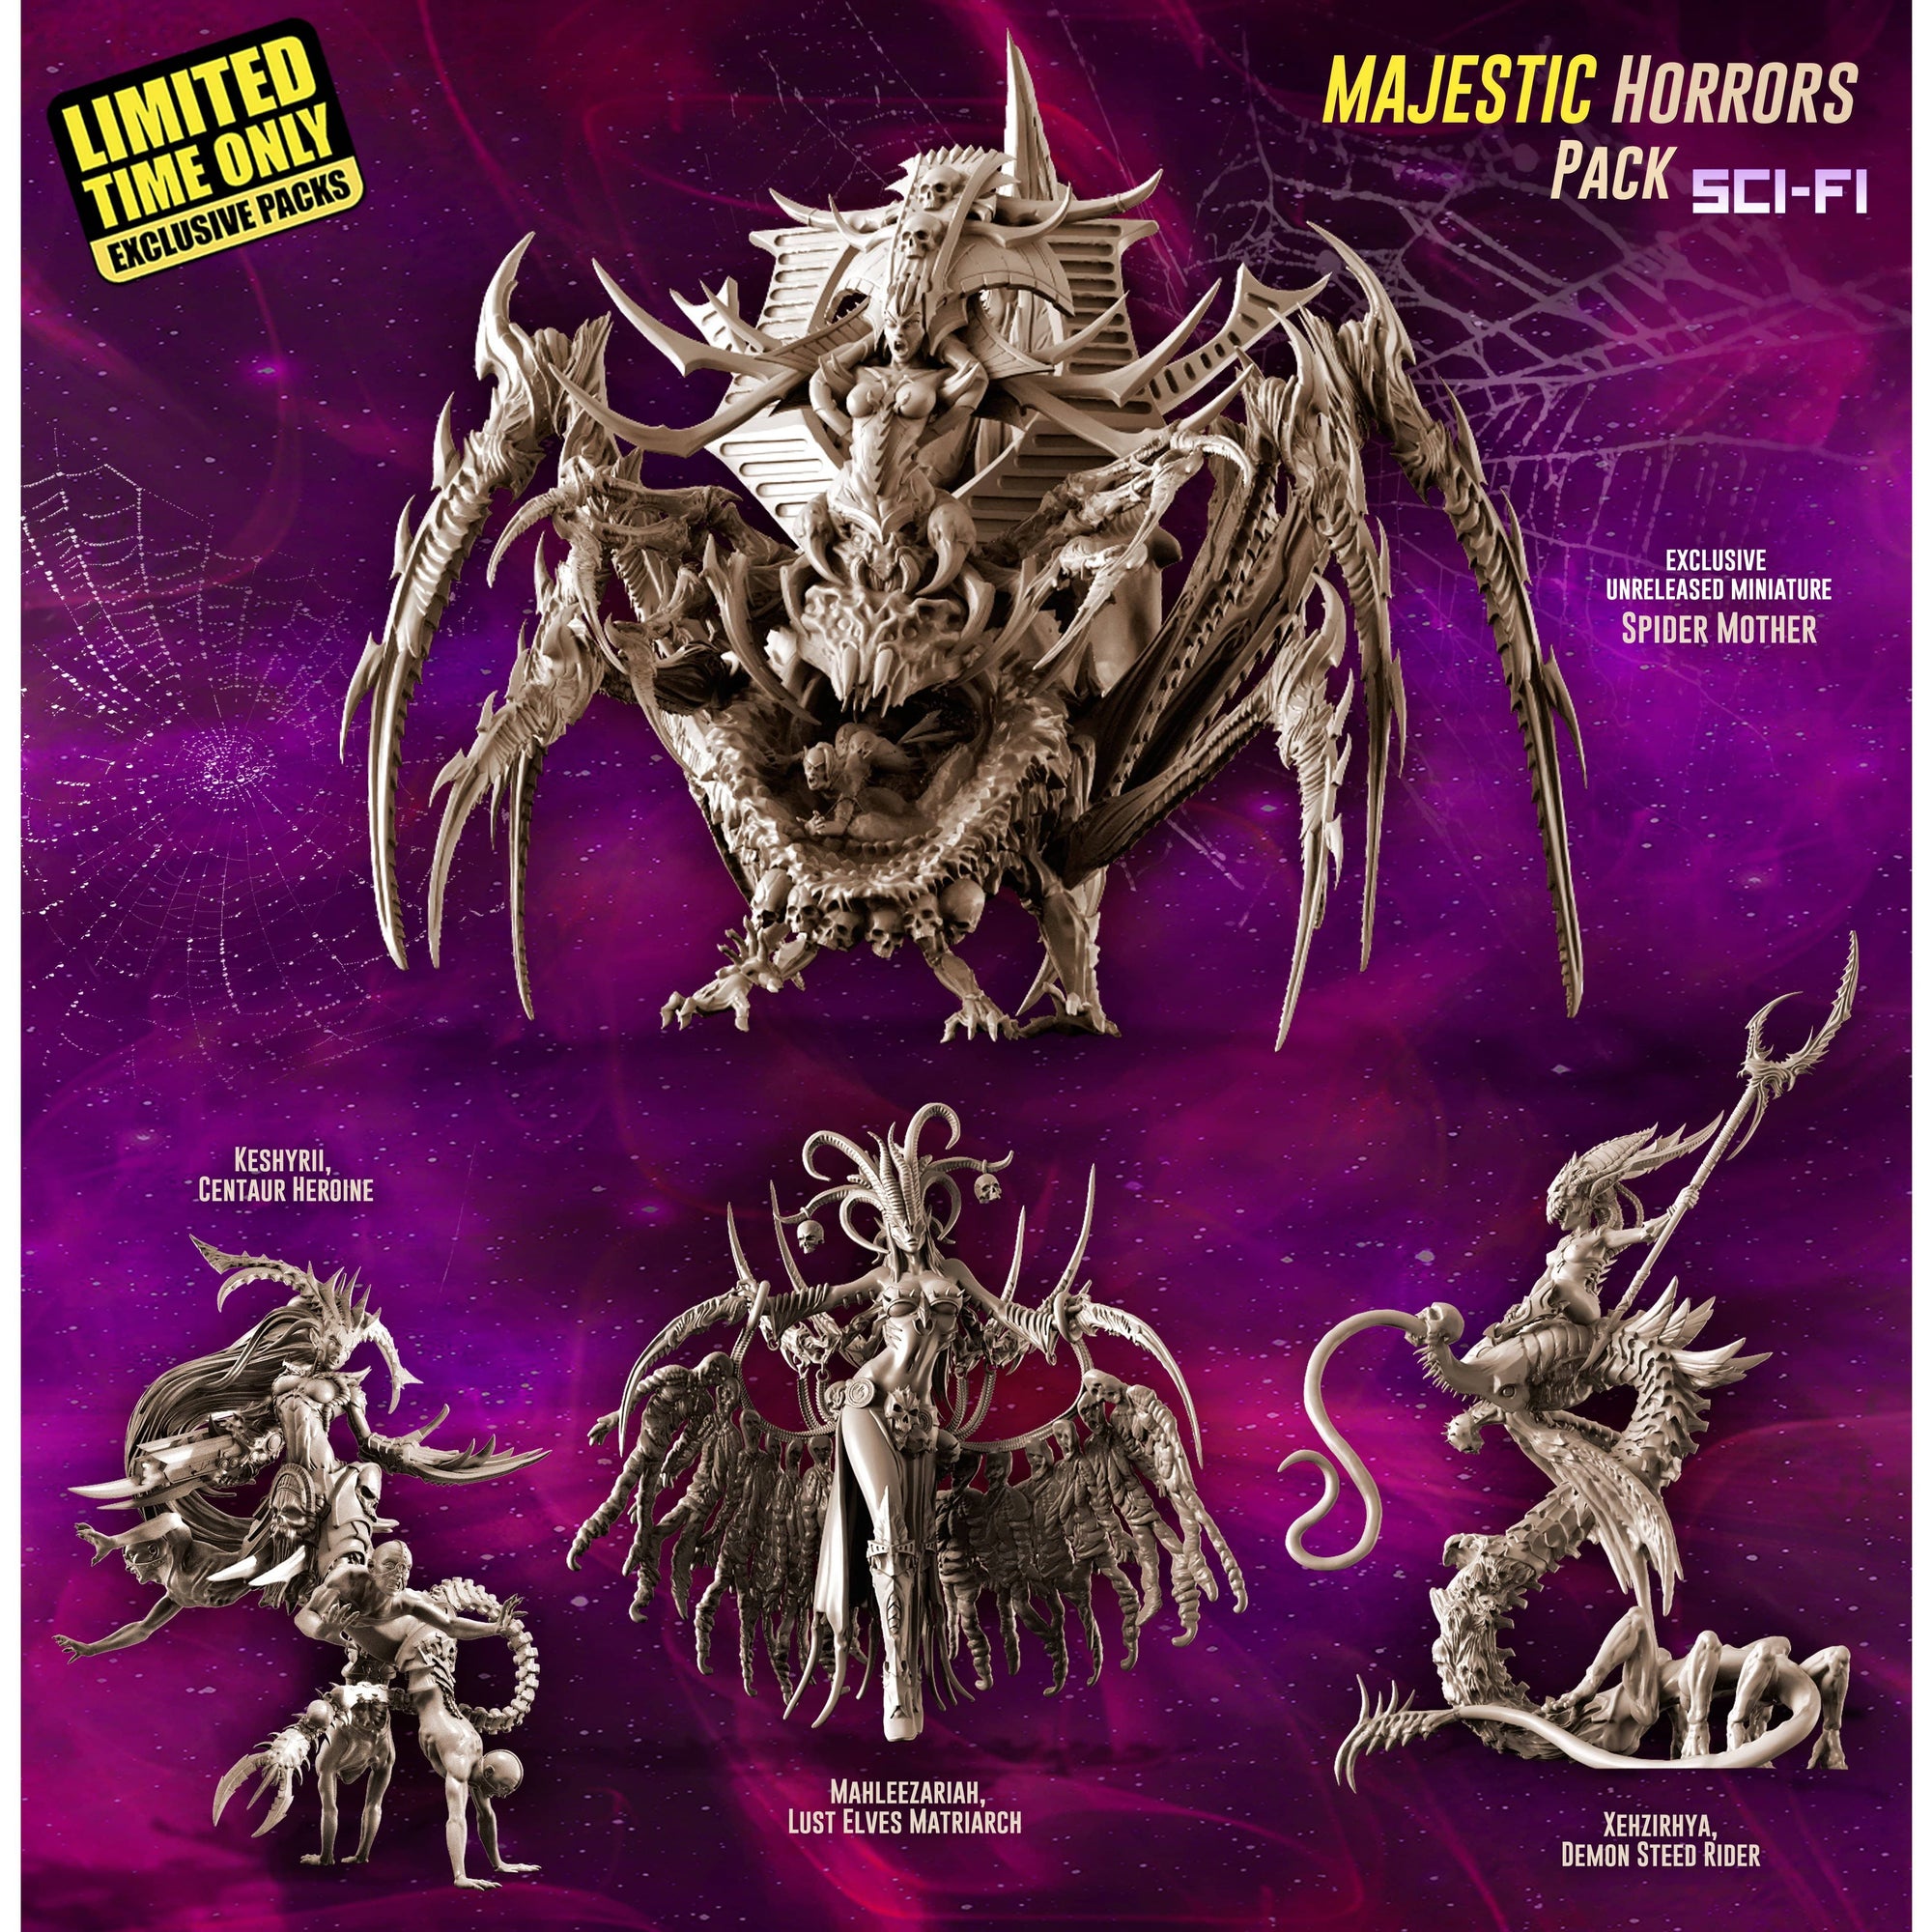 Exclusieve Majestic Horrors Pack (LE - Sci -Fi)